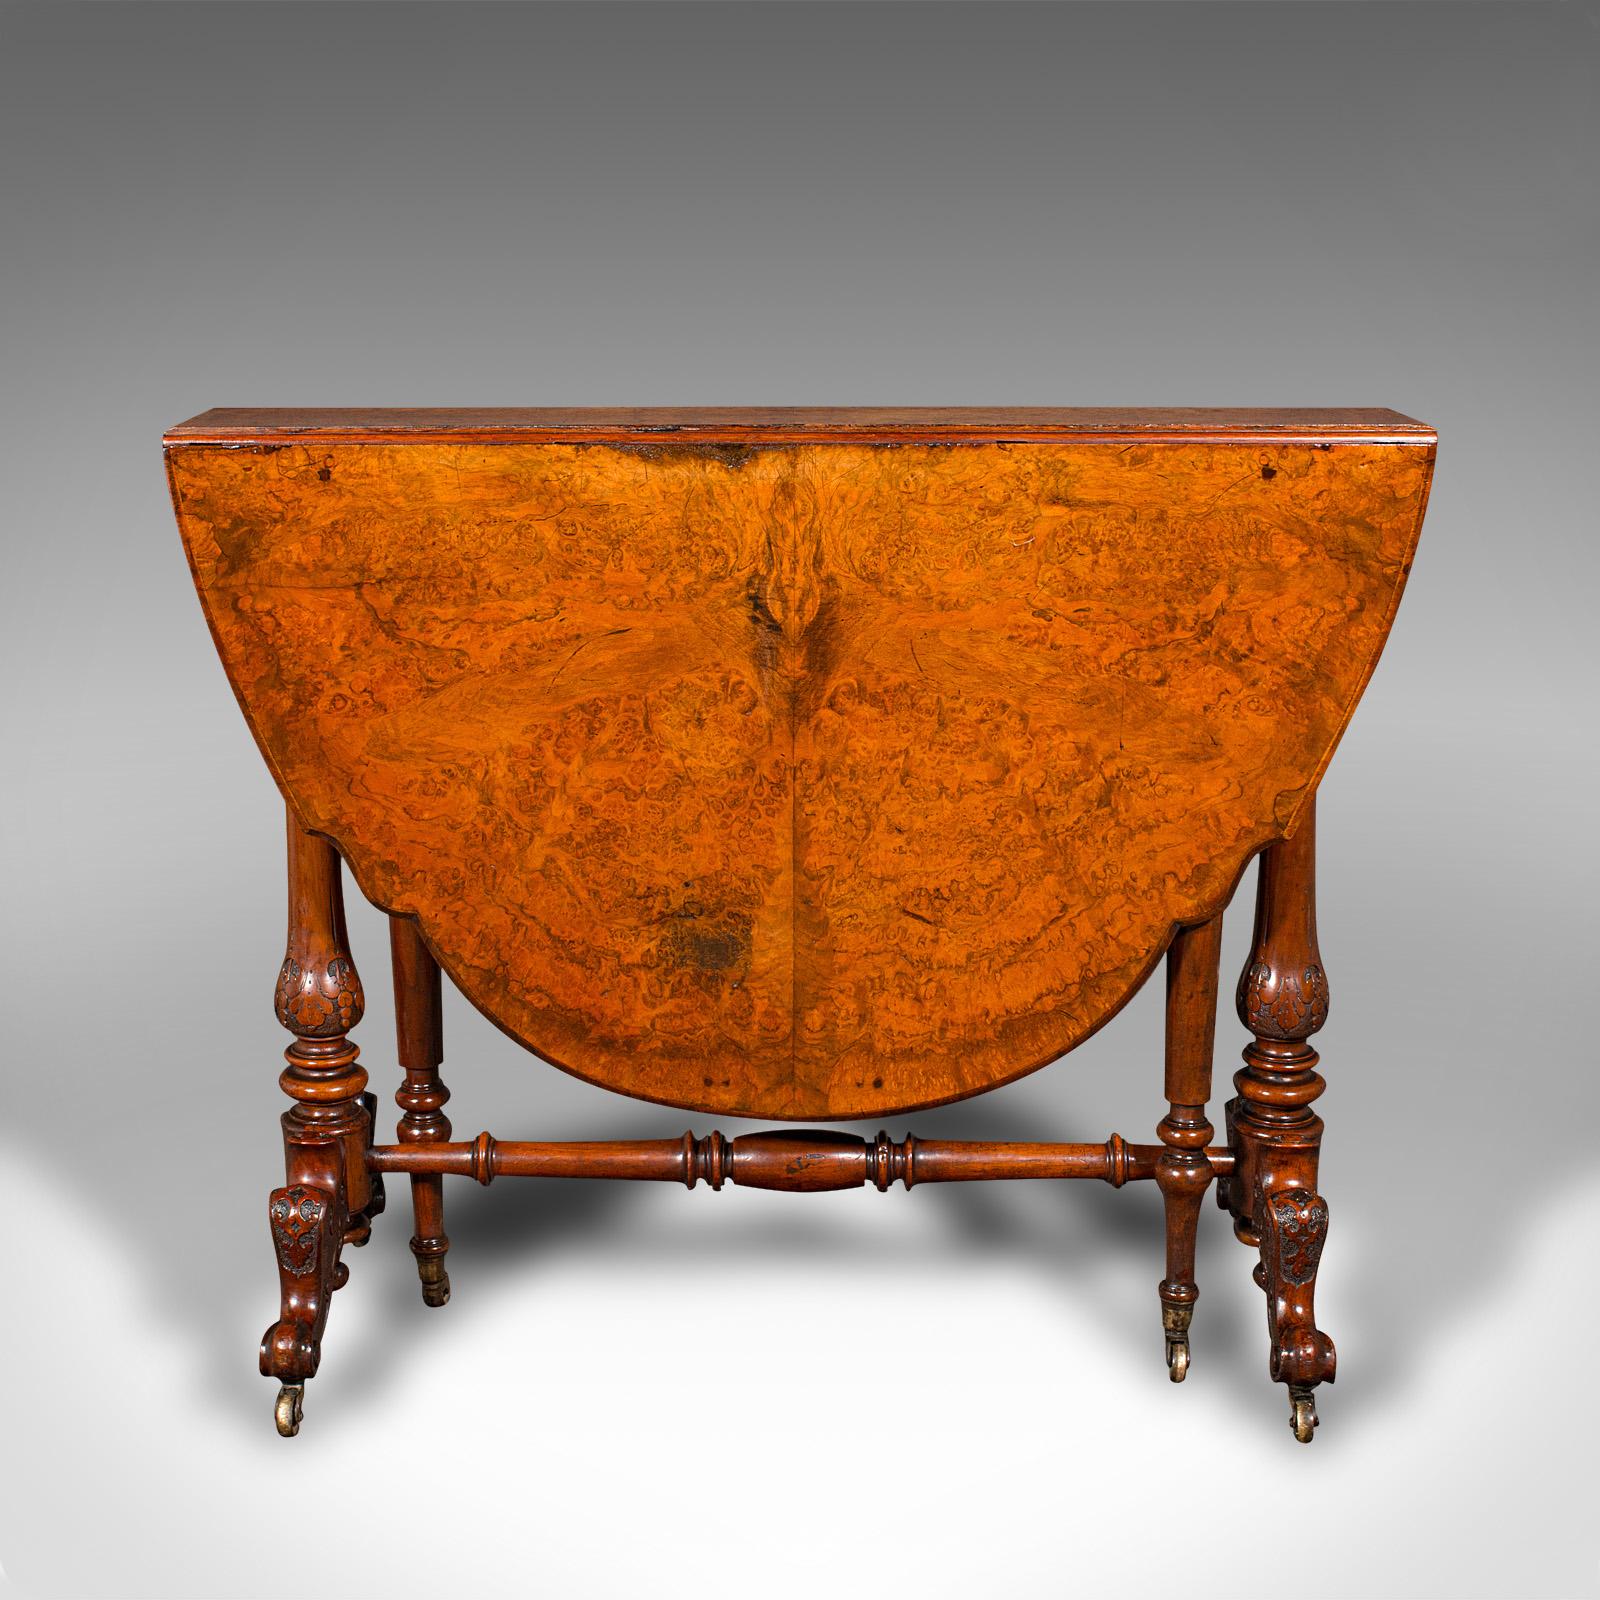 Early Victorian Antique Sutherland Table, English, Burr Walnut, 4 Seat, Occasional, Victorian For Sale